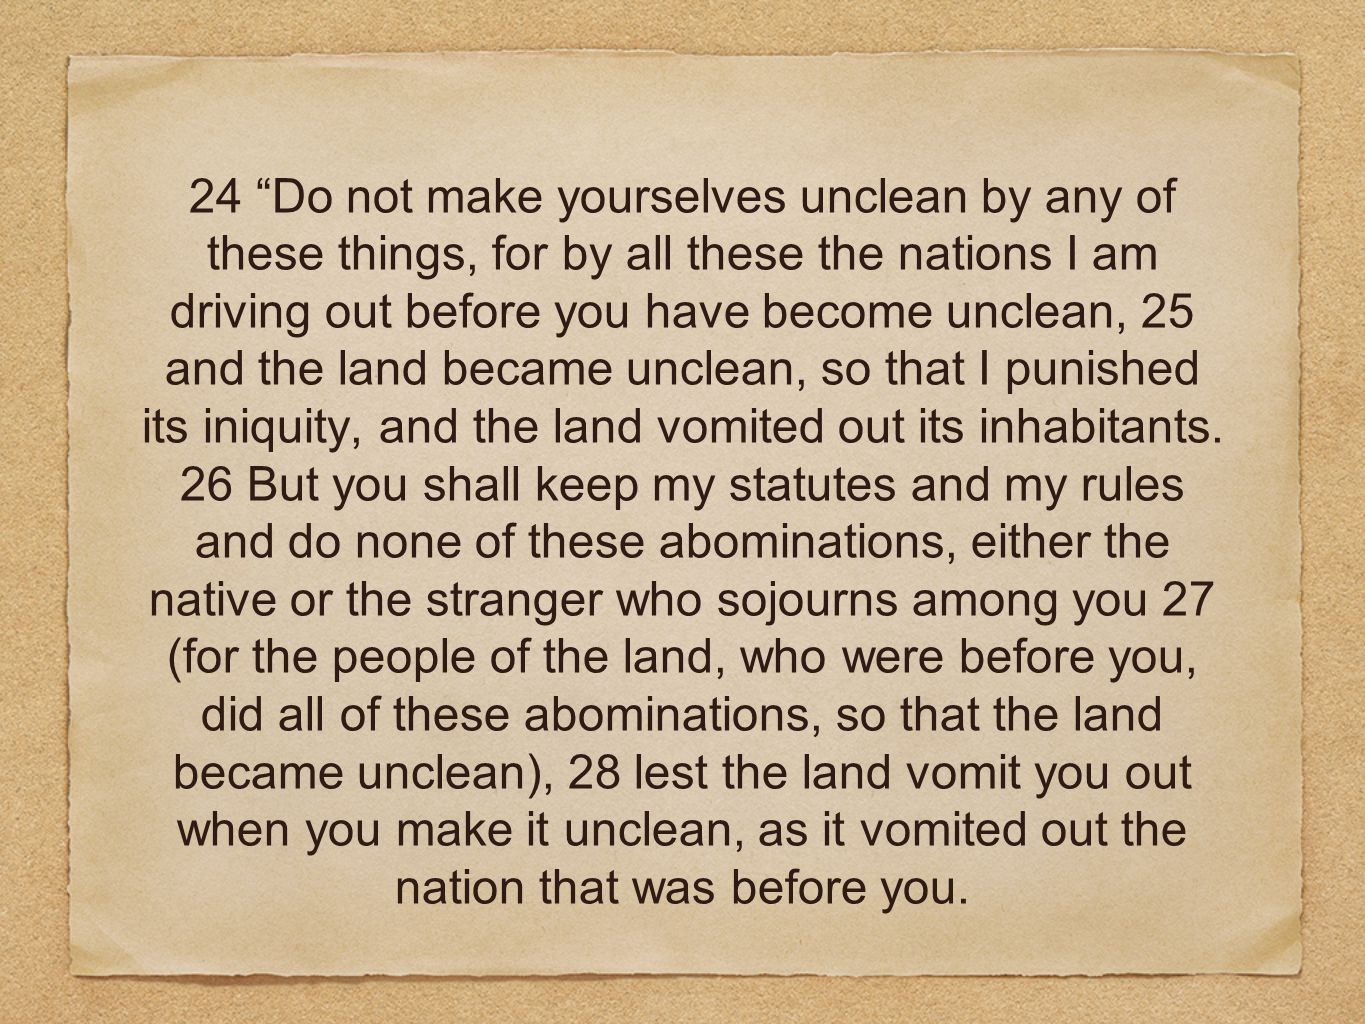 24 Do not make yourselves unclean by any of these things, for by all these the nations I am driving out before you have become unclean, 25 and the land became unclean, so that I punished its iniquity, and the land vomited out its inhabitants.